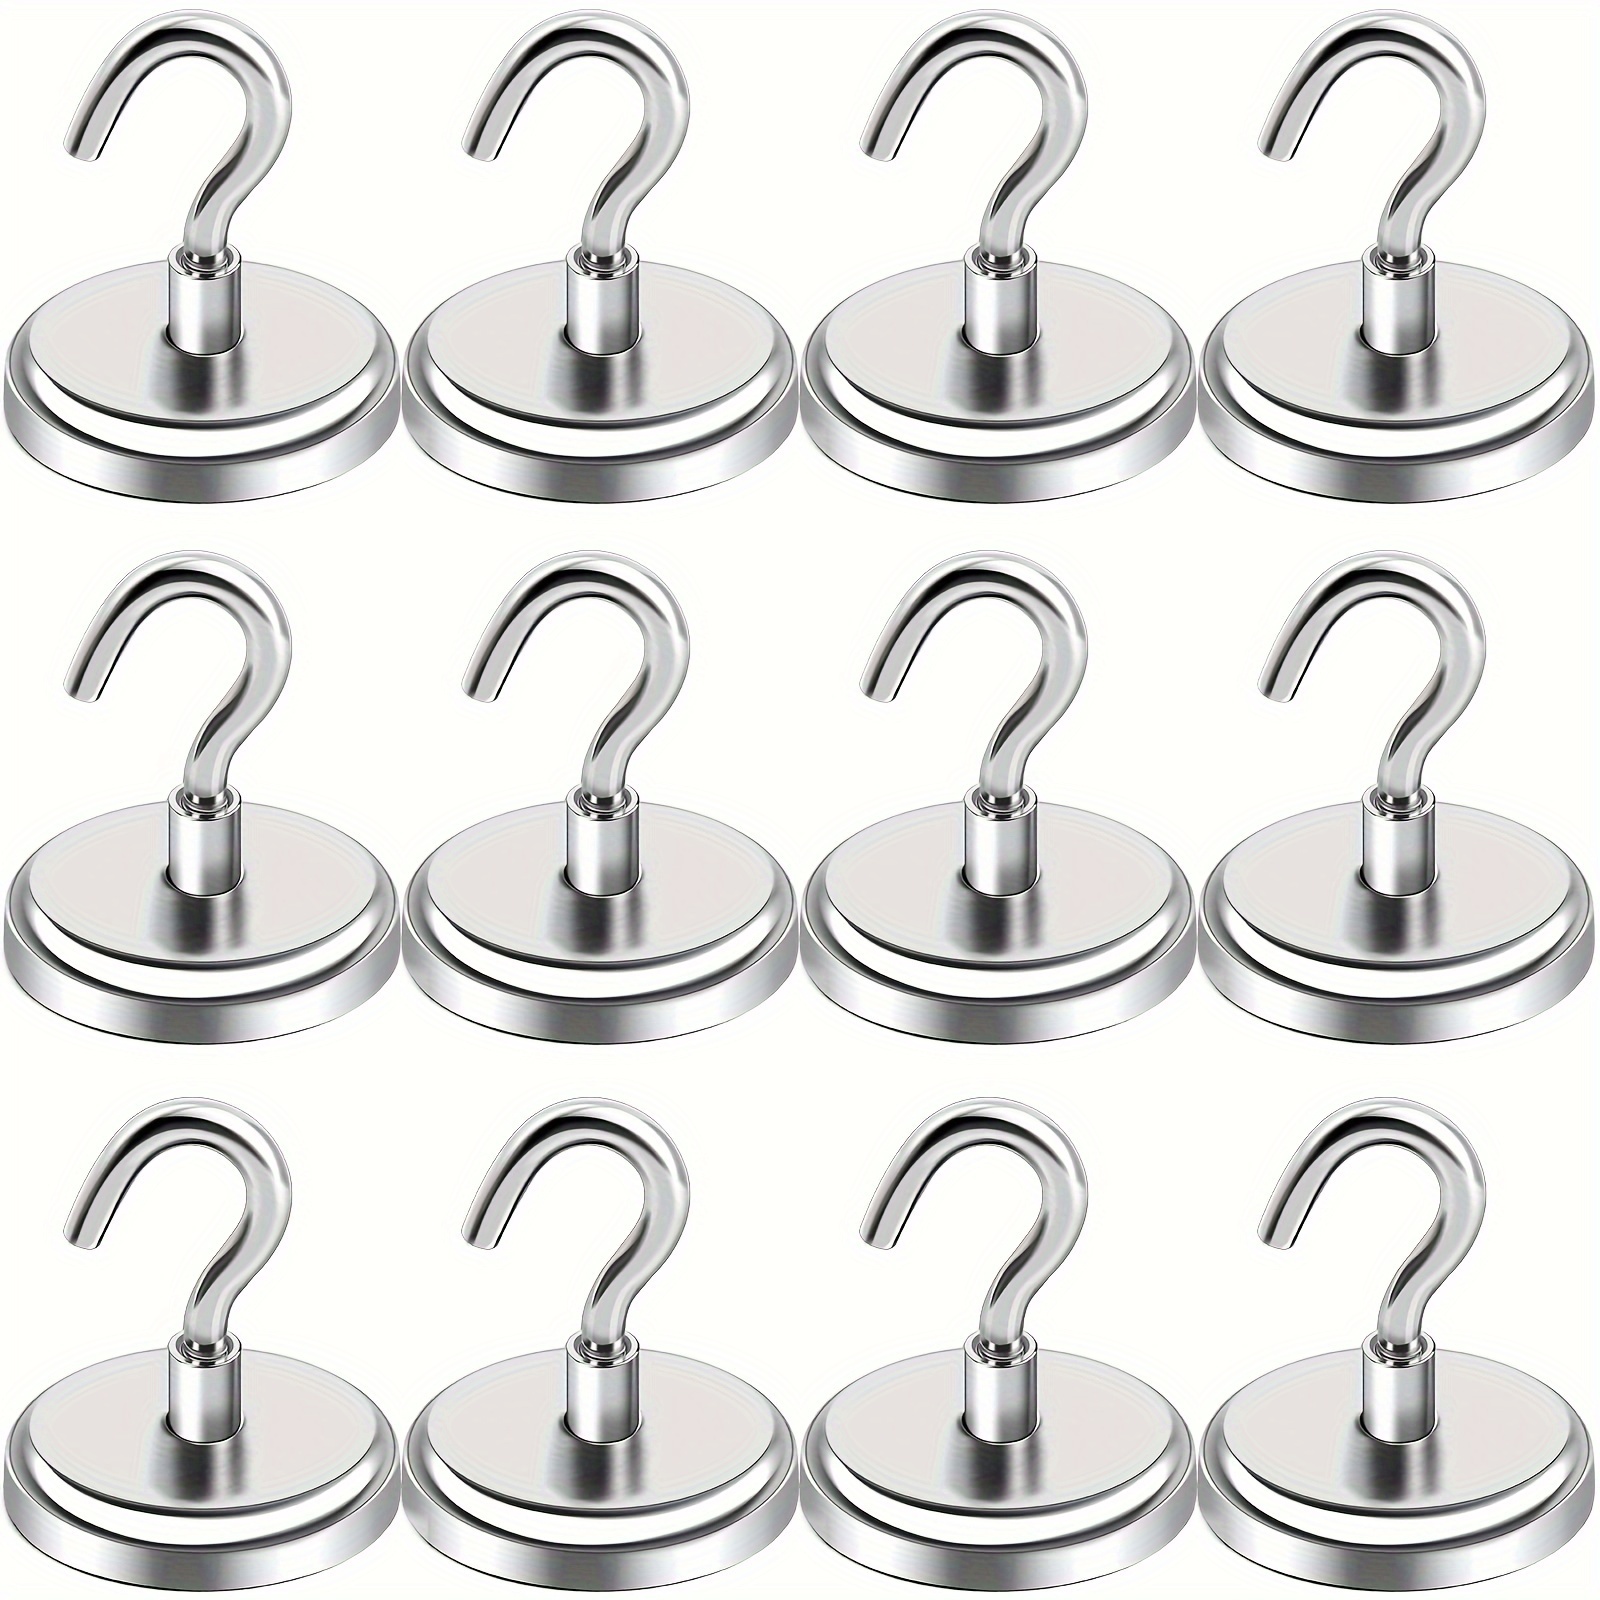 

Contemporary 100lbs Heavy Duty Magnetic Hooks - 12 Pack, Strong Neodymium Magnet Hooks For Home, Kitchen, Workplace, Office - Metal, Wall Mount, No Drill Easy Installation, Multipurpose Use